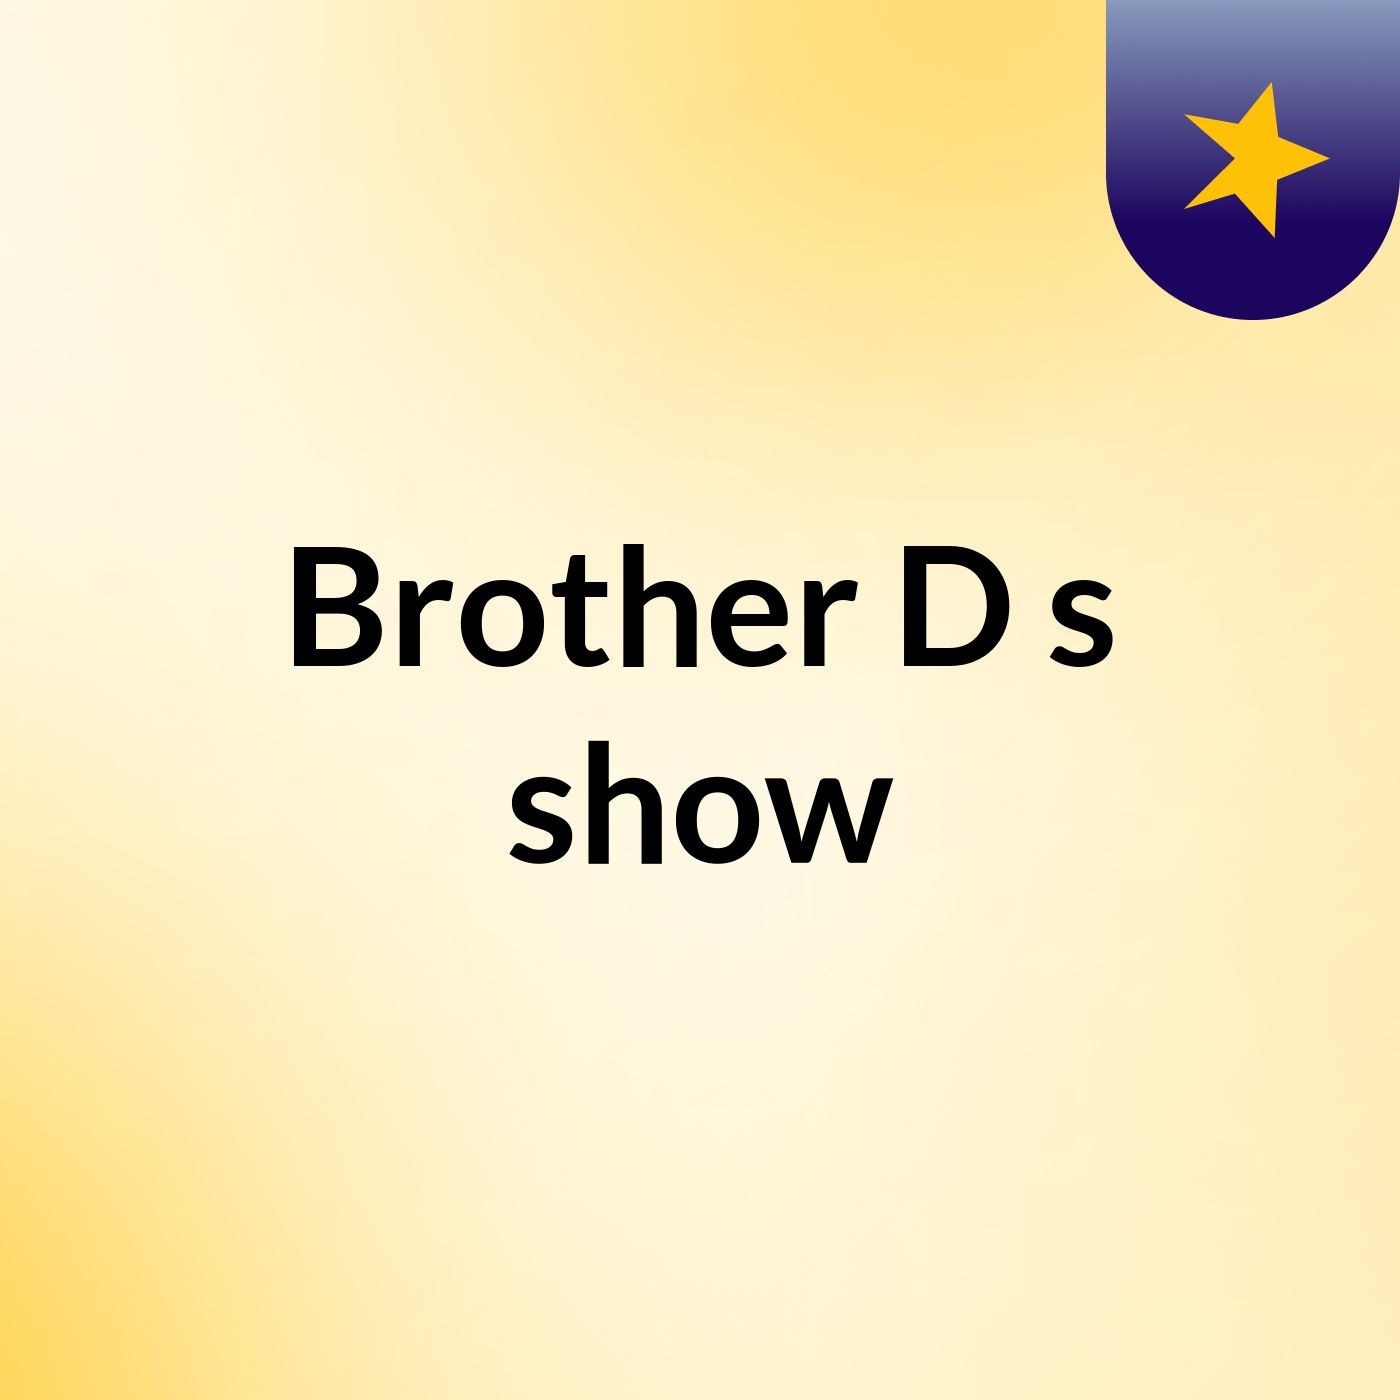 Brother D's show